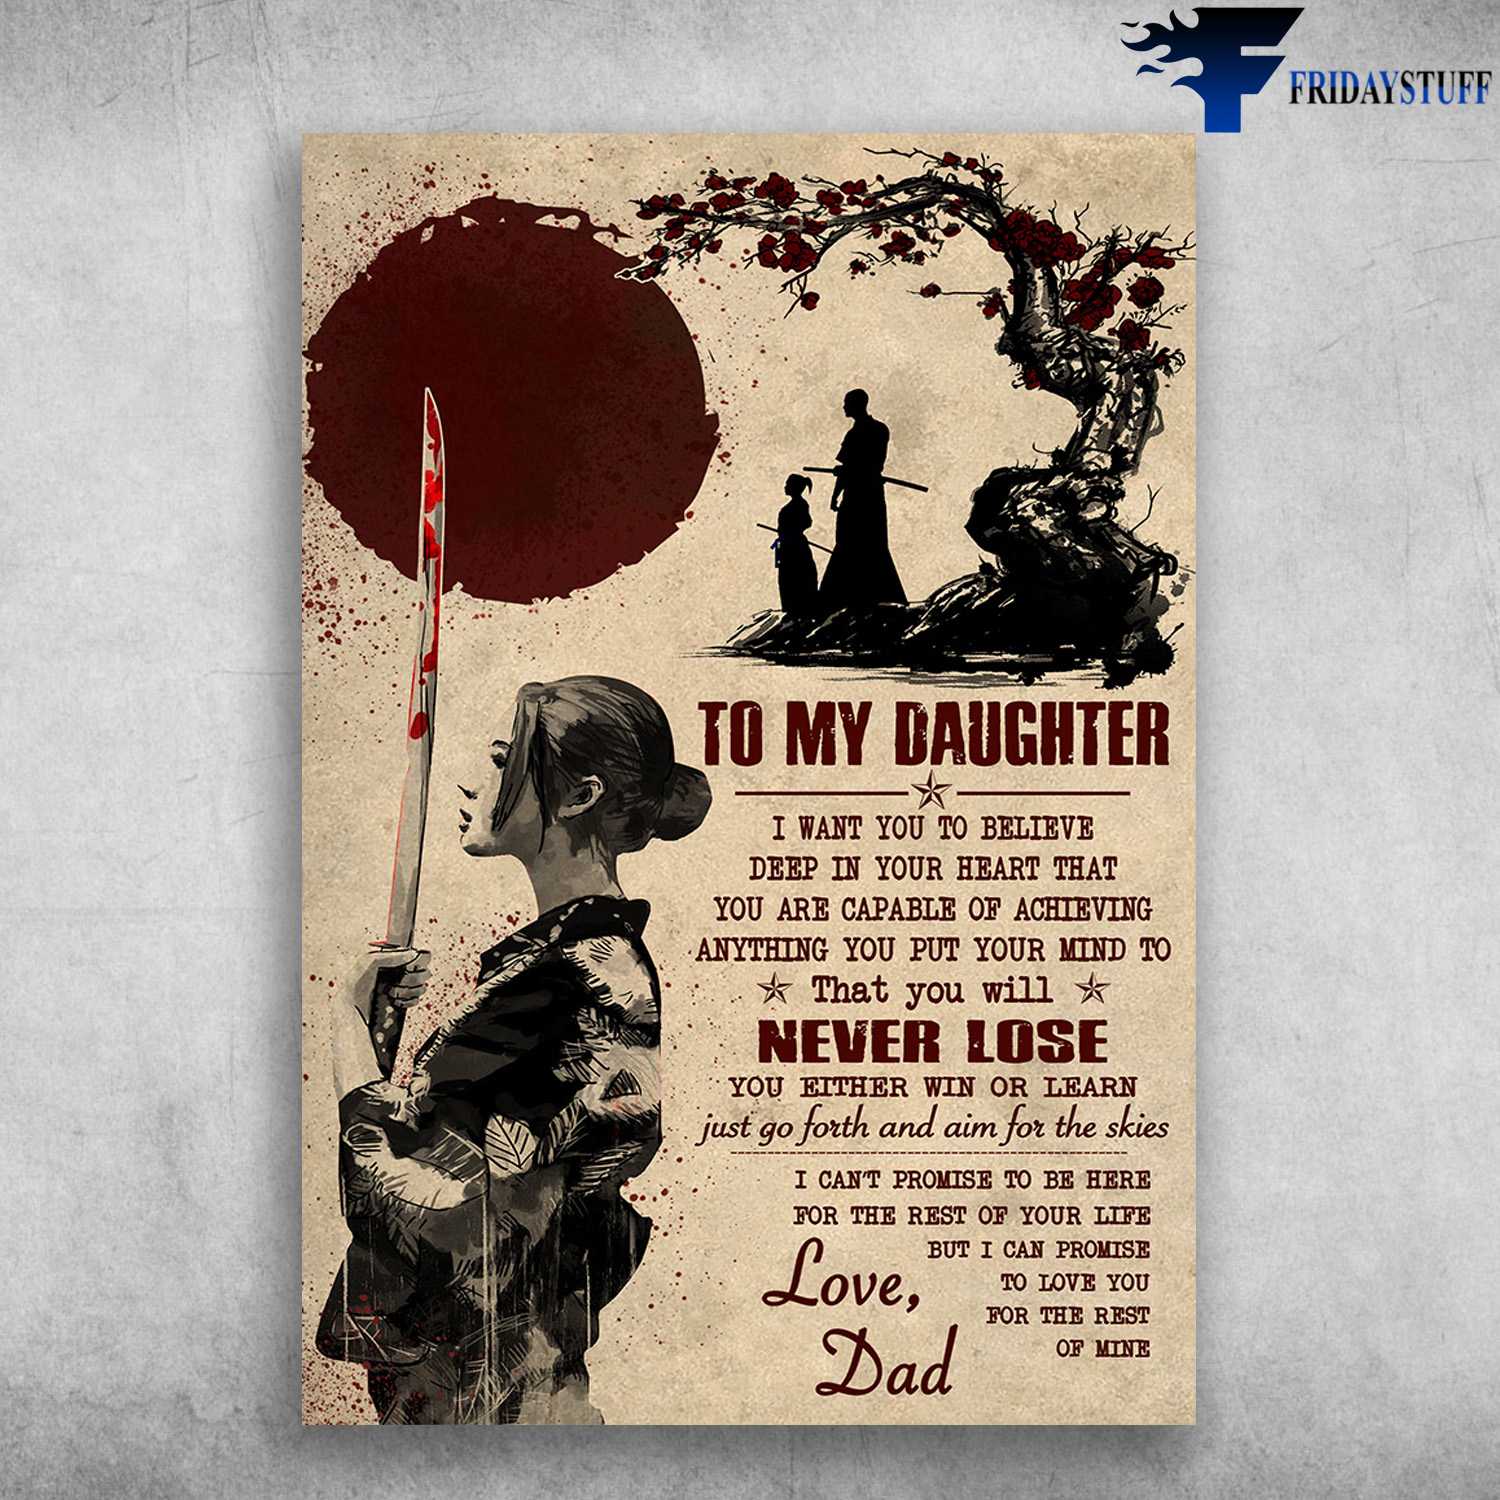 Dad And Daughter Samurai - To My Daughter, I Want You To Believe Deep In Your Heart, That You Are Capable Of Achieving, Anything You Put Your Mind To, That You Will Never Lose, Love Dad